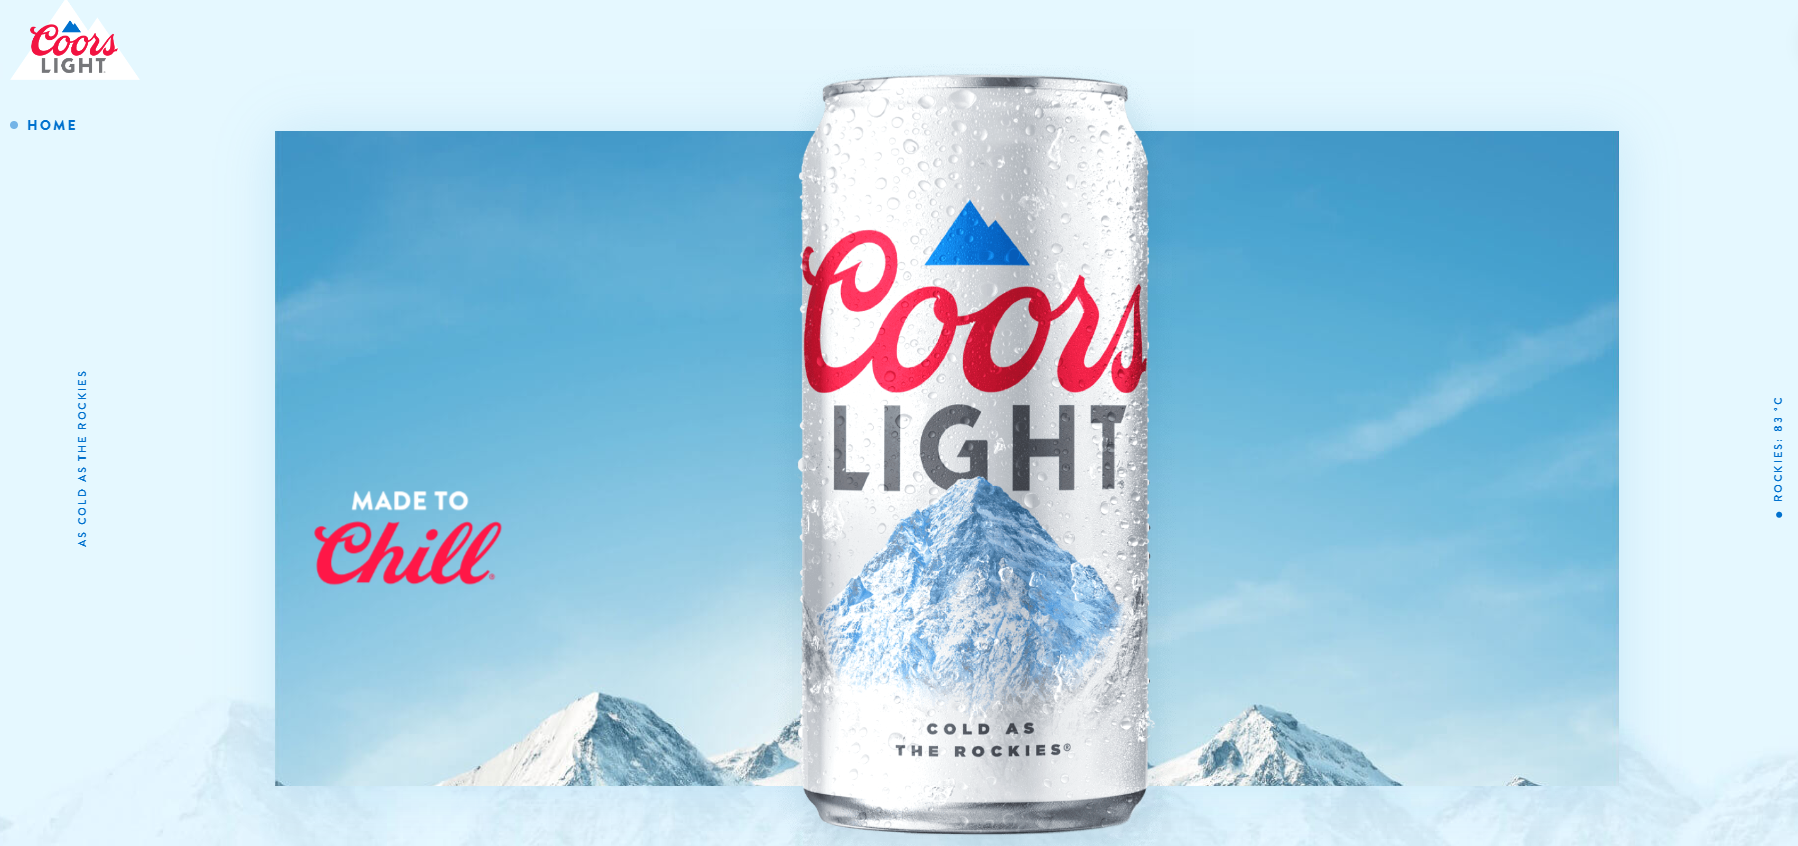 Coors Light claims their beer is as cold as the Rockies.